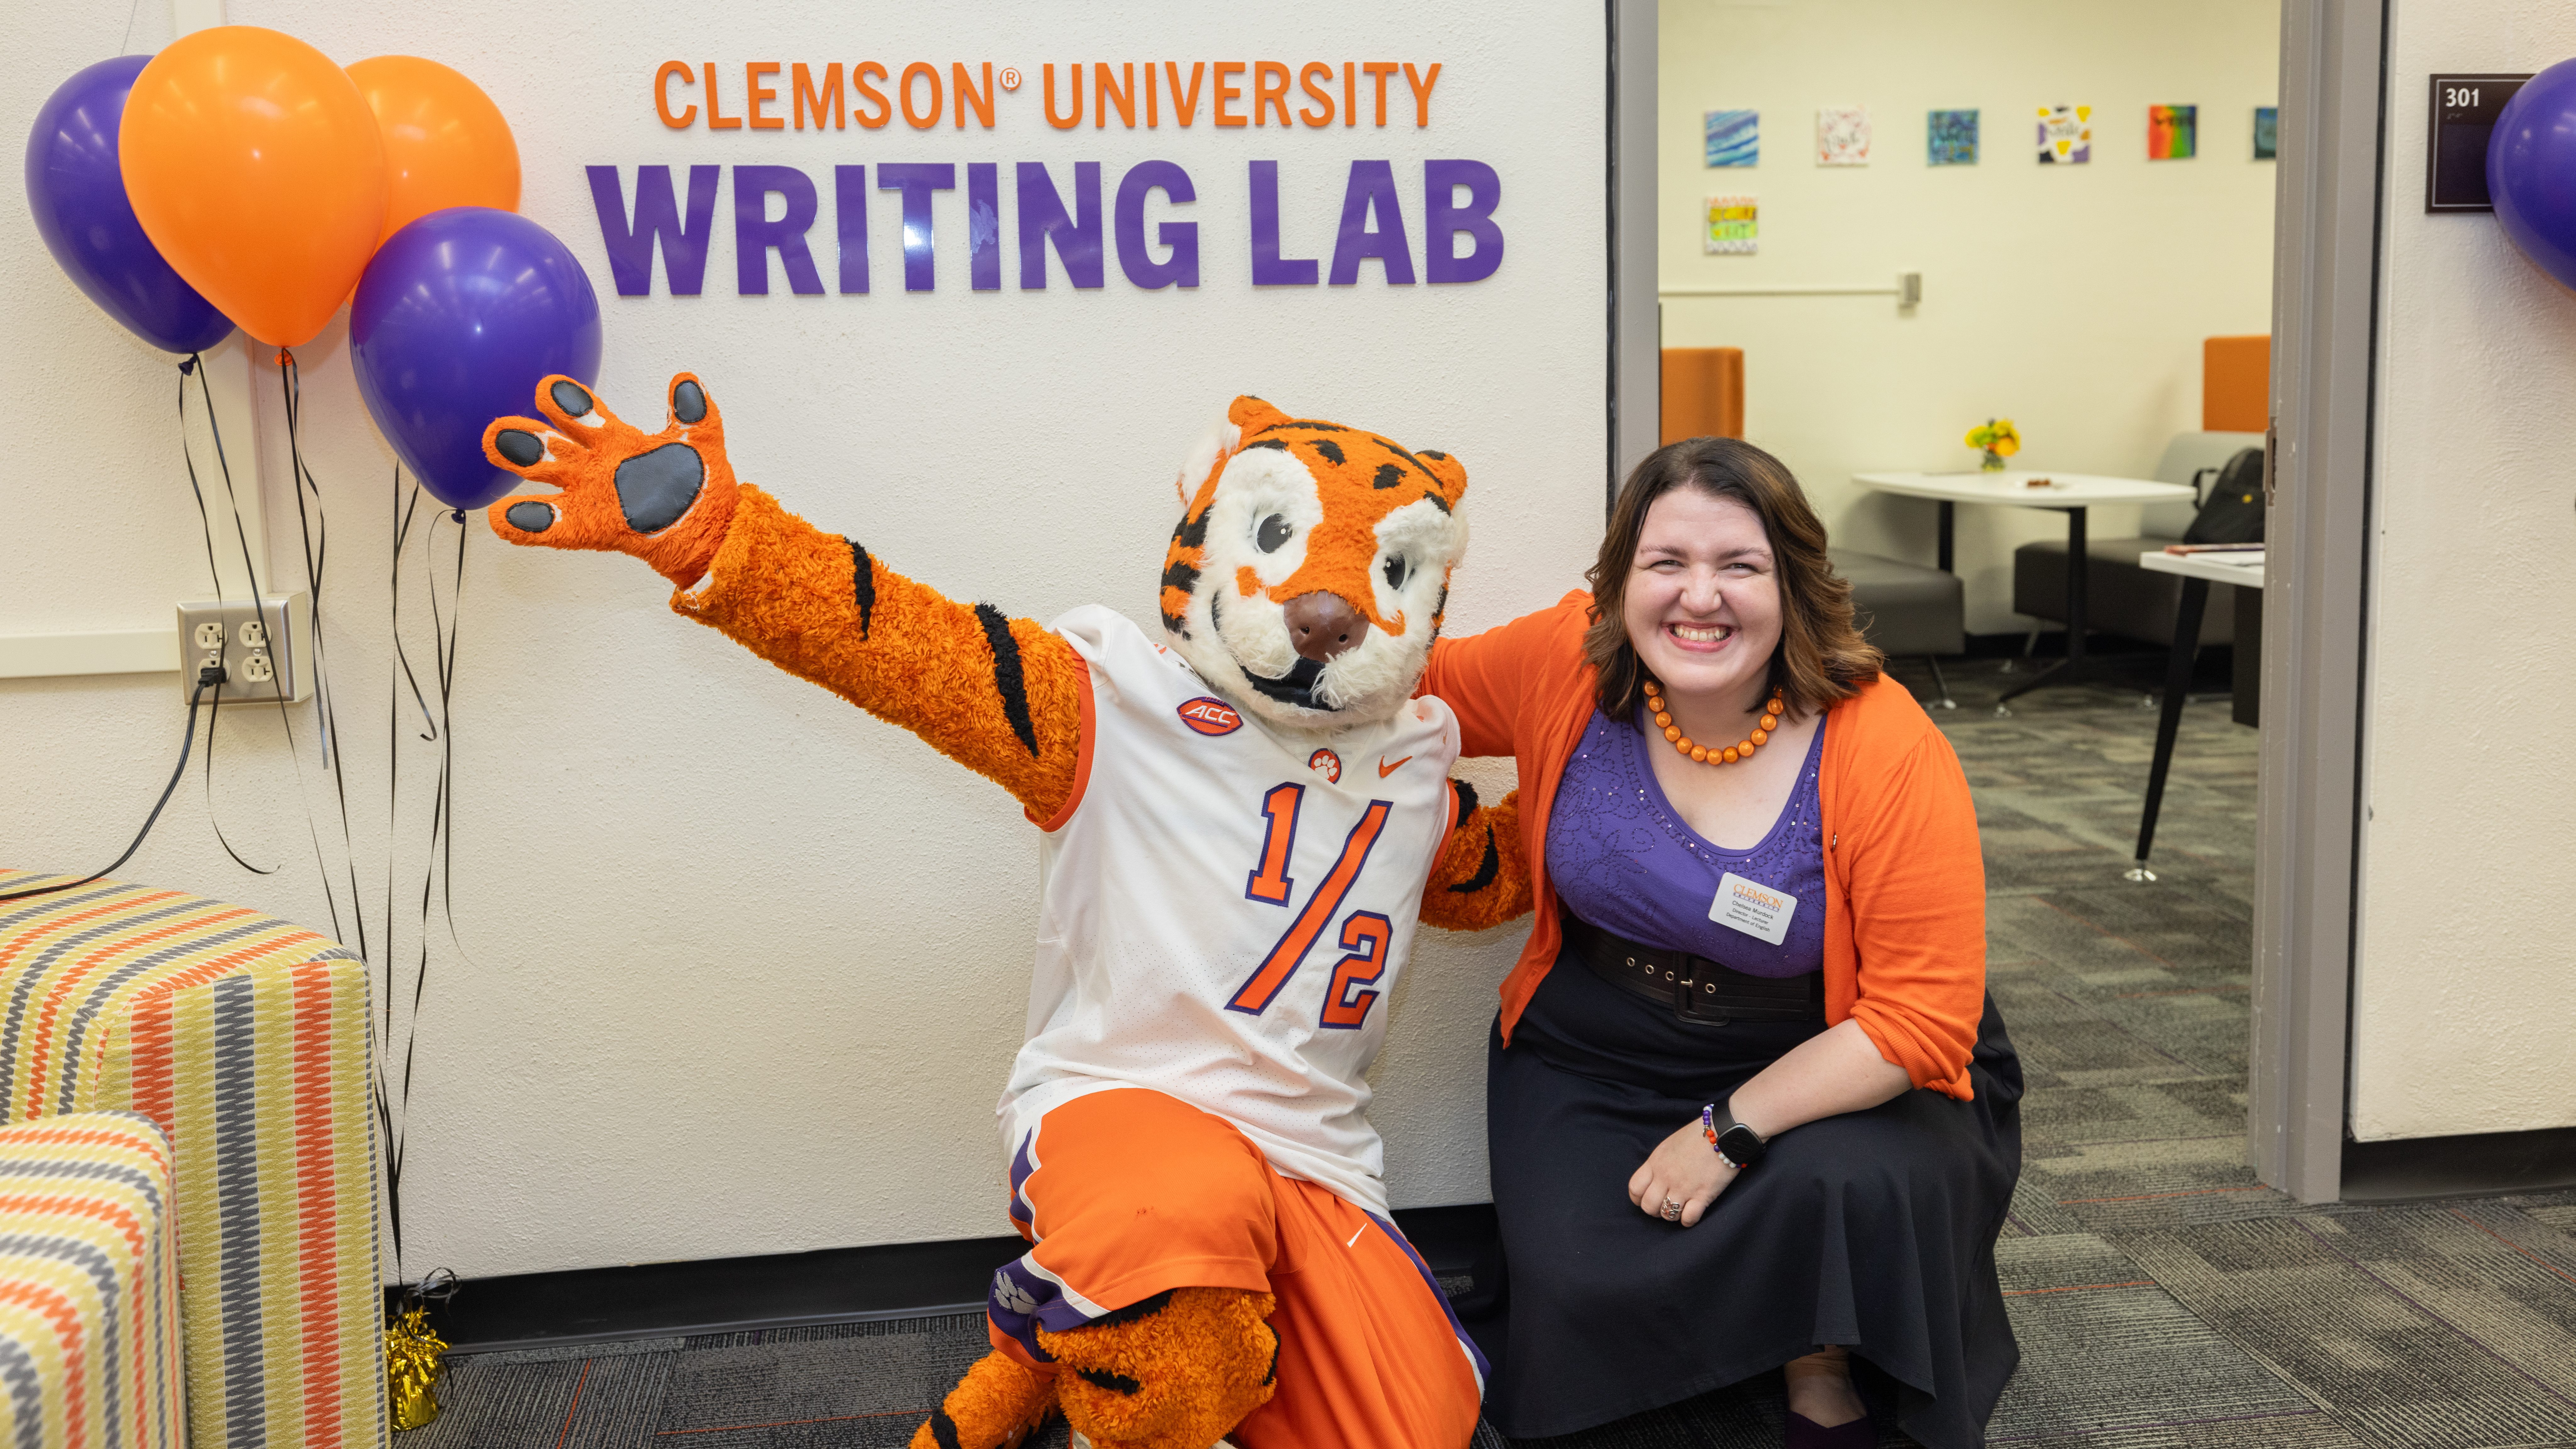 The Tiger cub and Writing Lab director Chelsea Murdock smile in front of the entrance to the Writing Lab